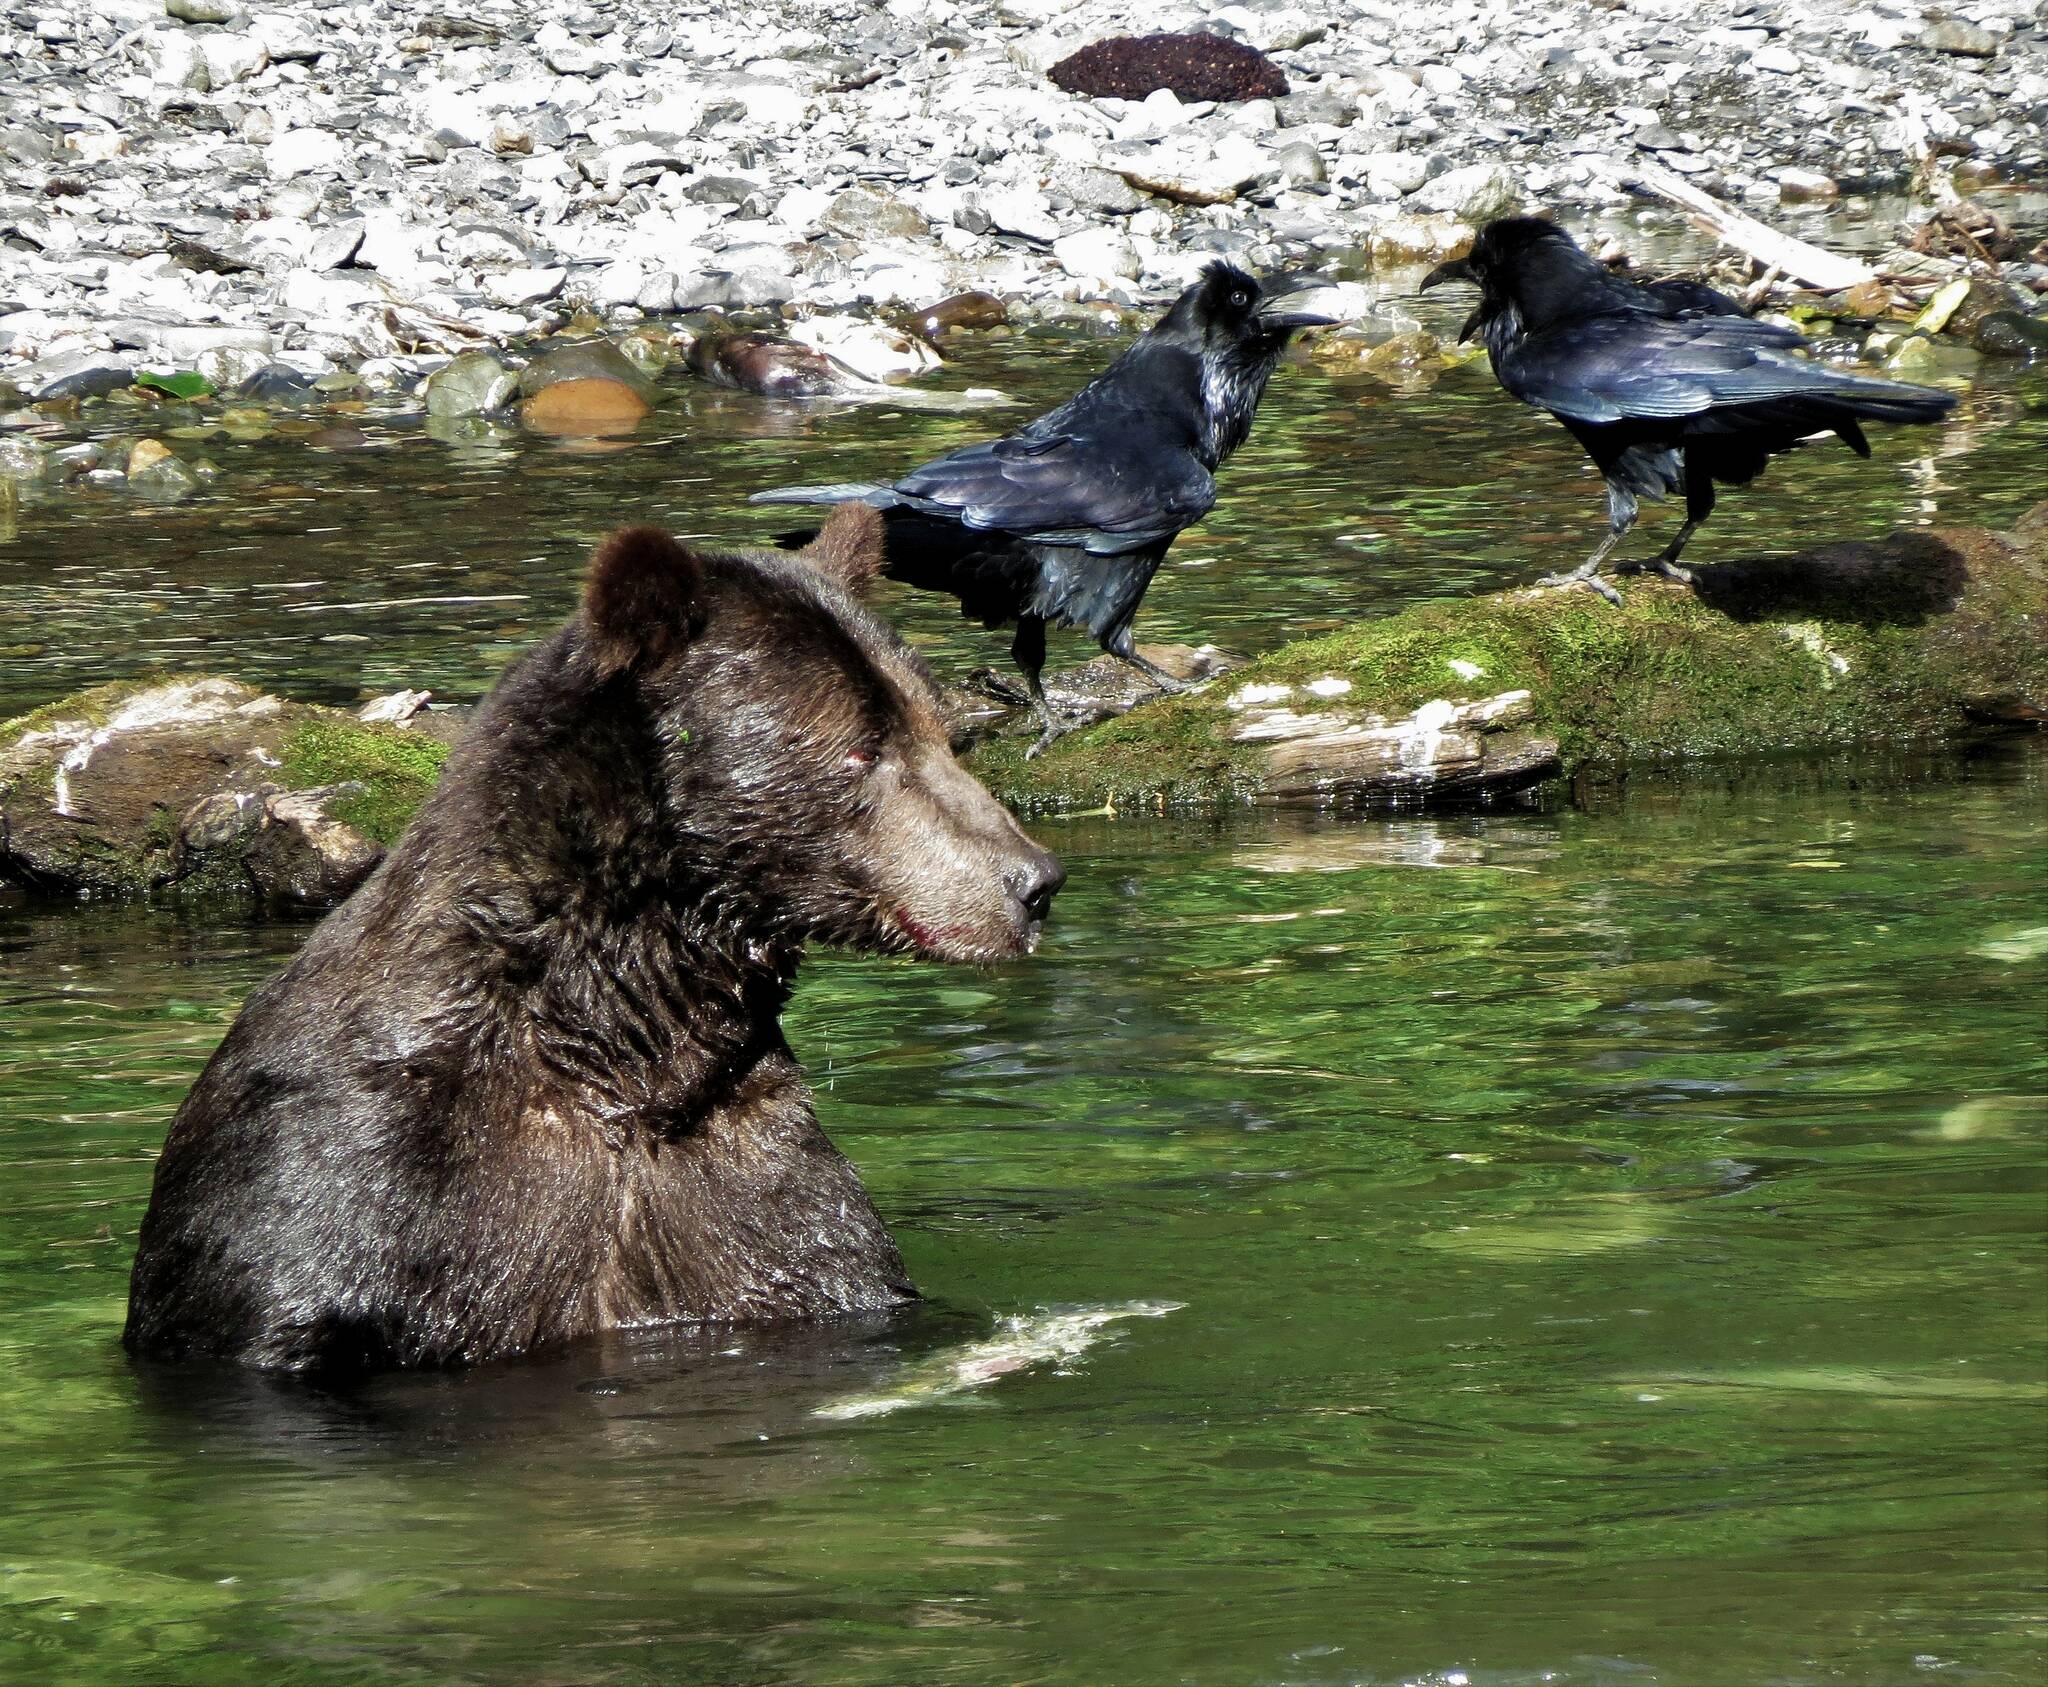 A brown bear fishes for salmon on Chichagof Island. (Courtesy Photo / Bjorn Dihle)